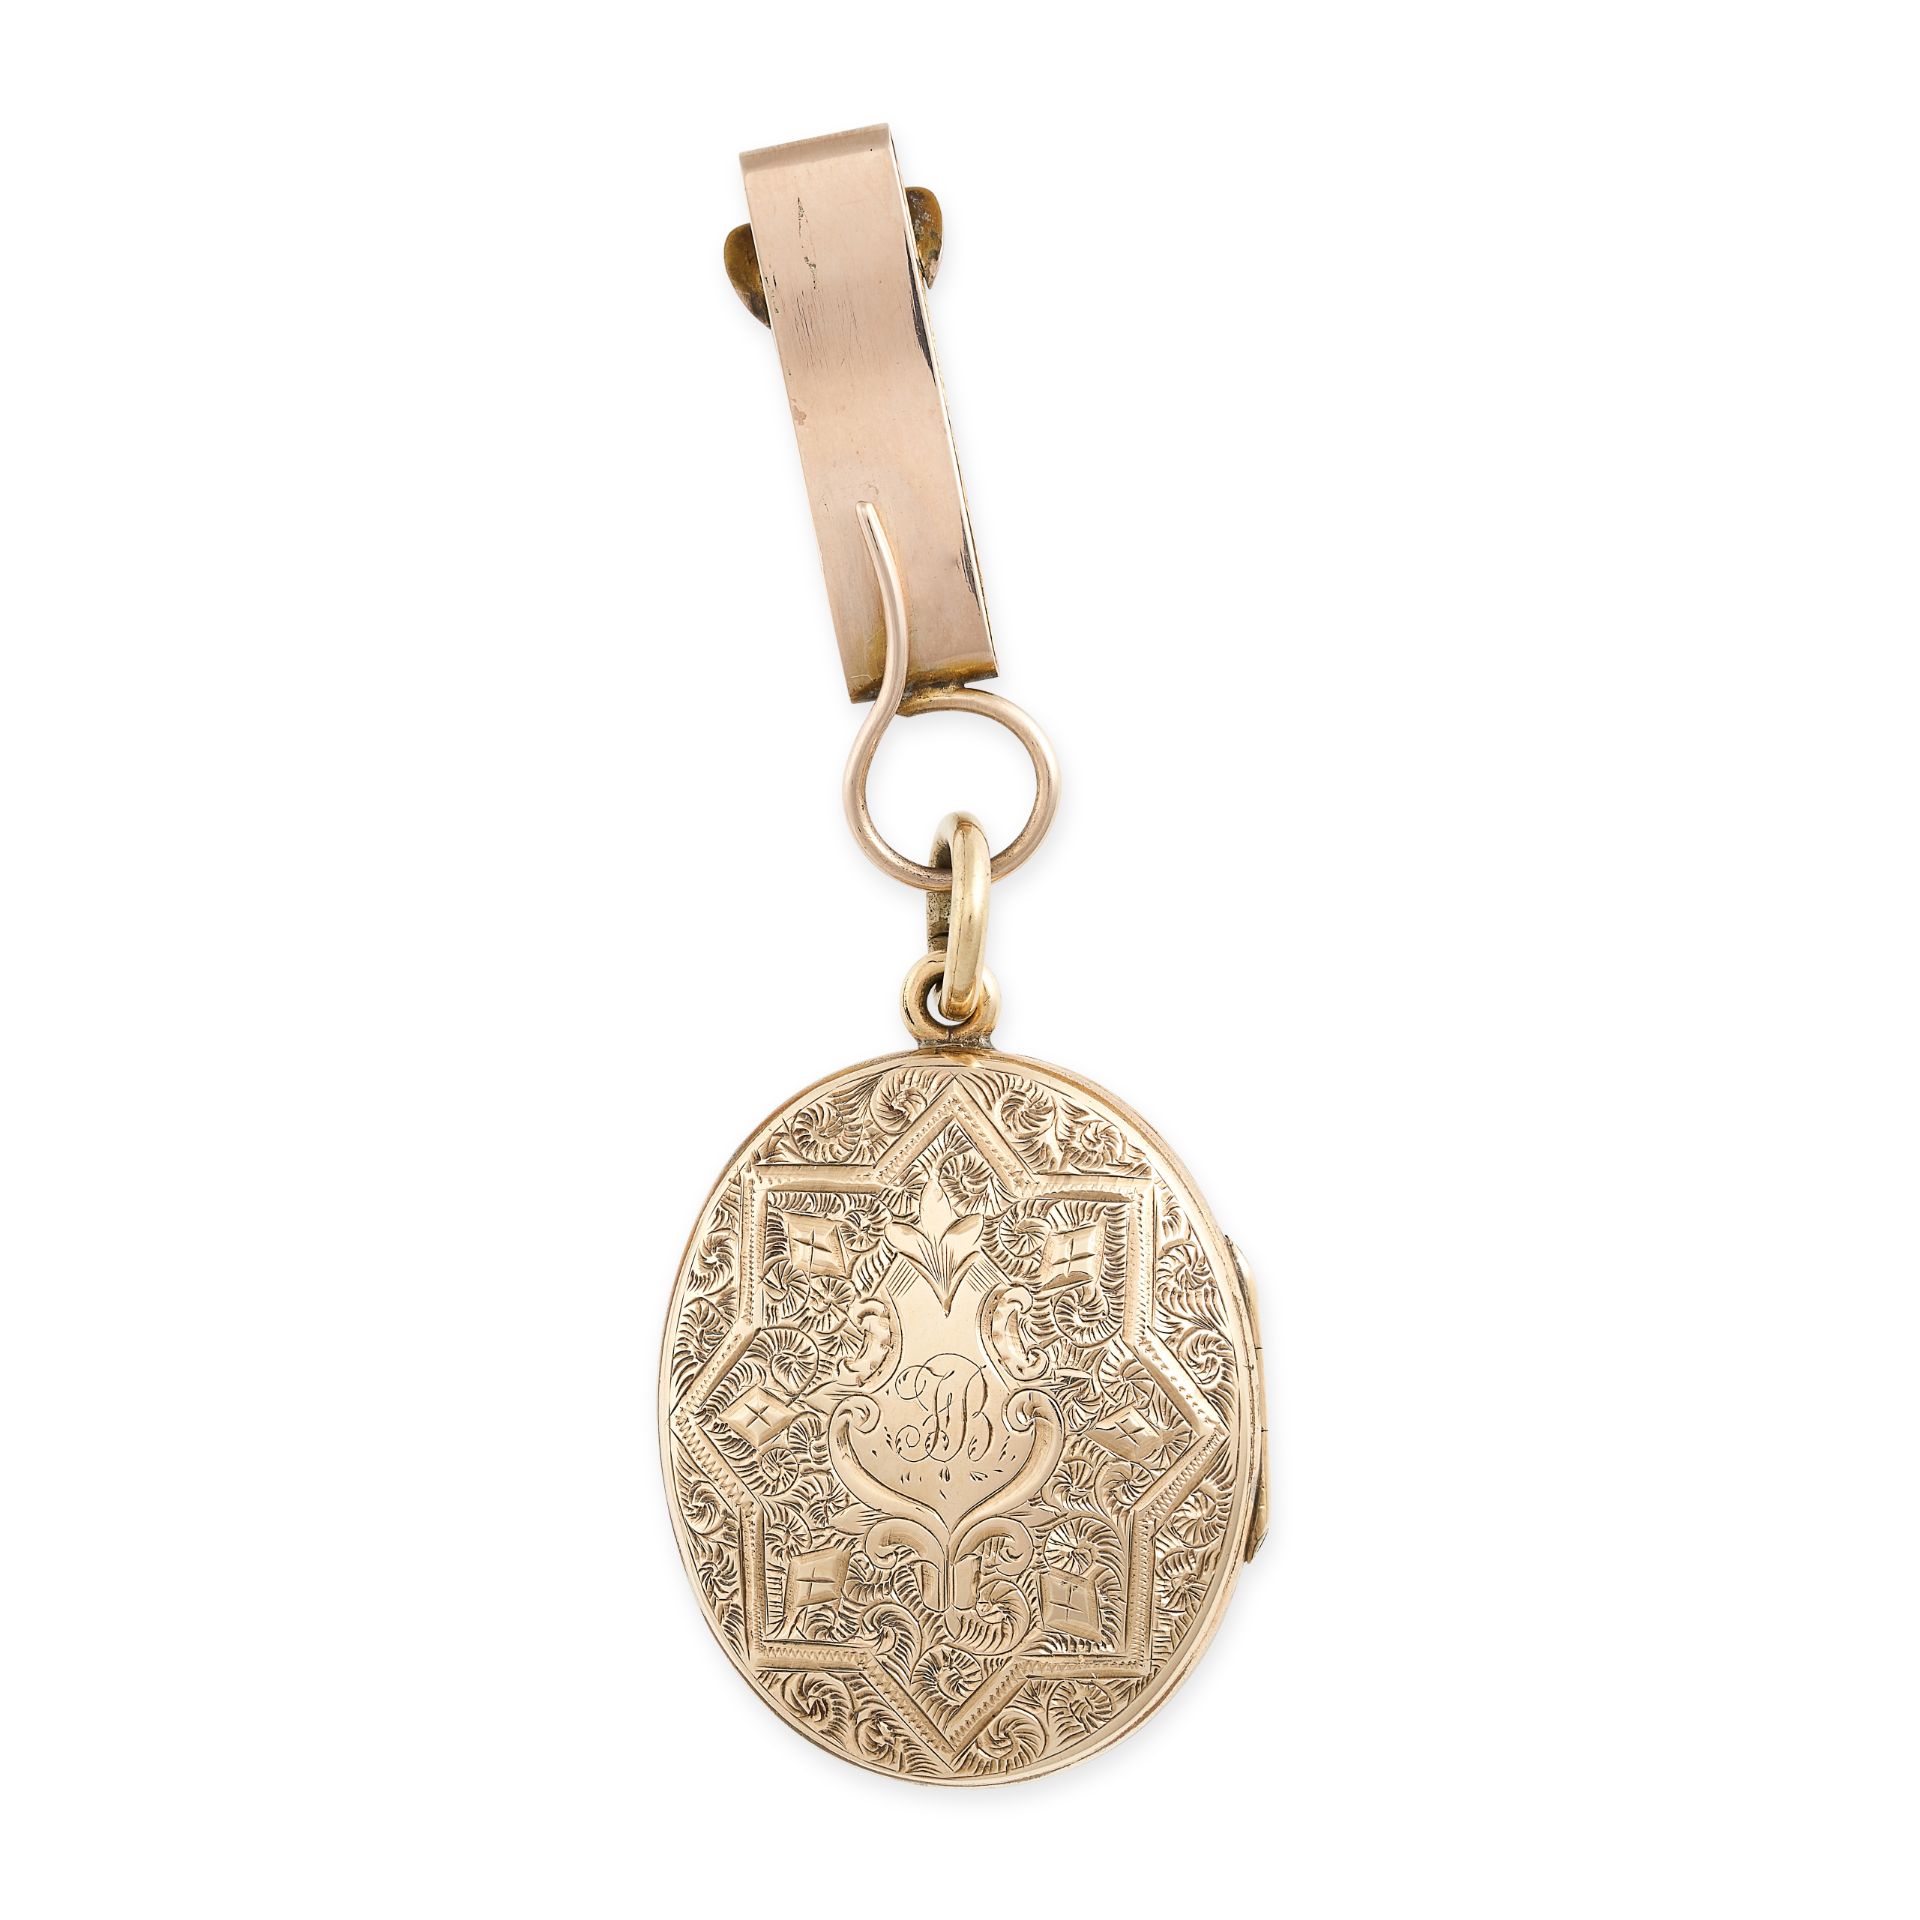 NO RESERVE - AN ANTIQUE PEARL AND ENAMEL MOURNING LOCKET PENDANT in yellow gold, the hinged oval - Image 2 of 2